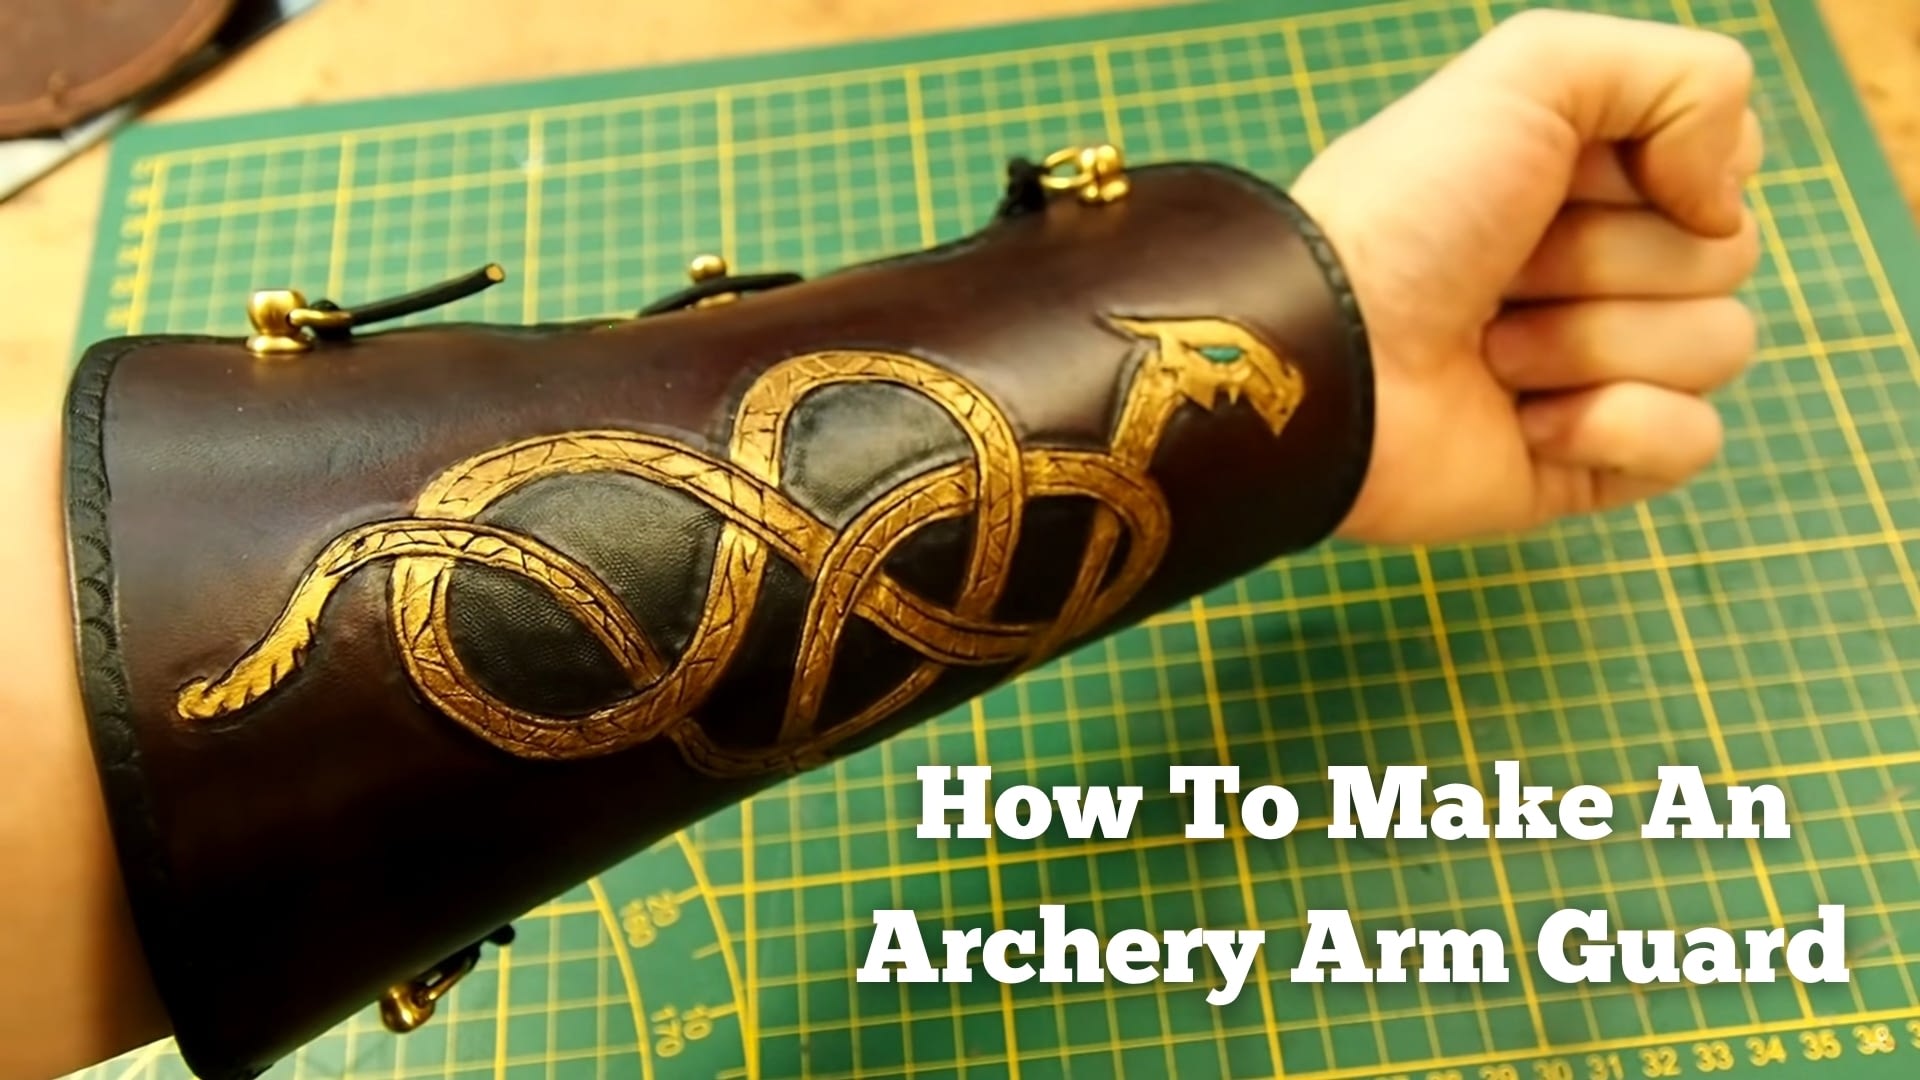 How To Make An Archery Arm Guard